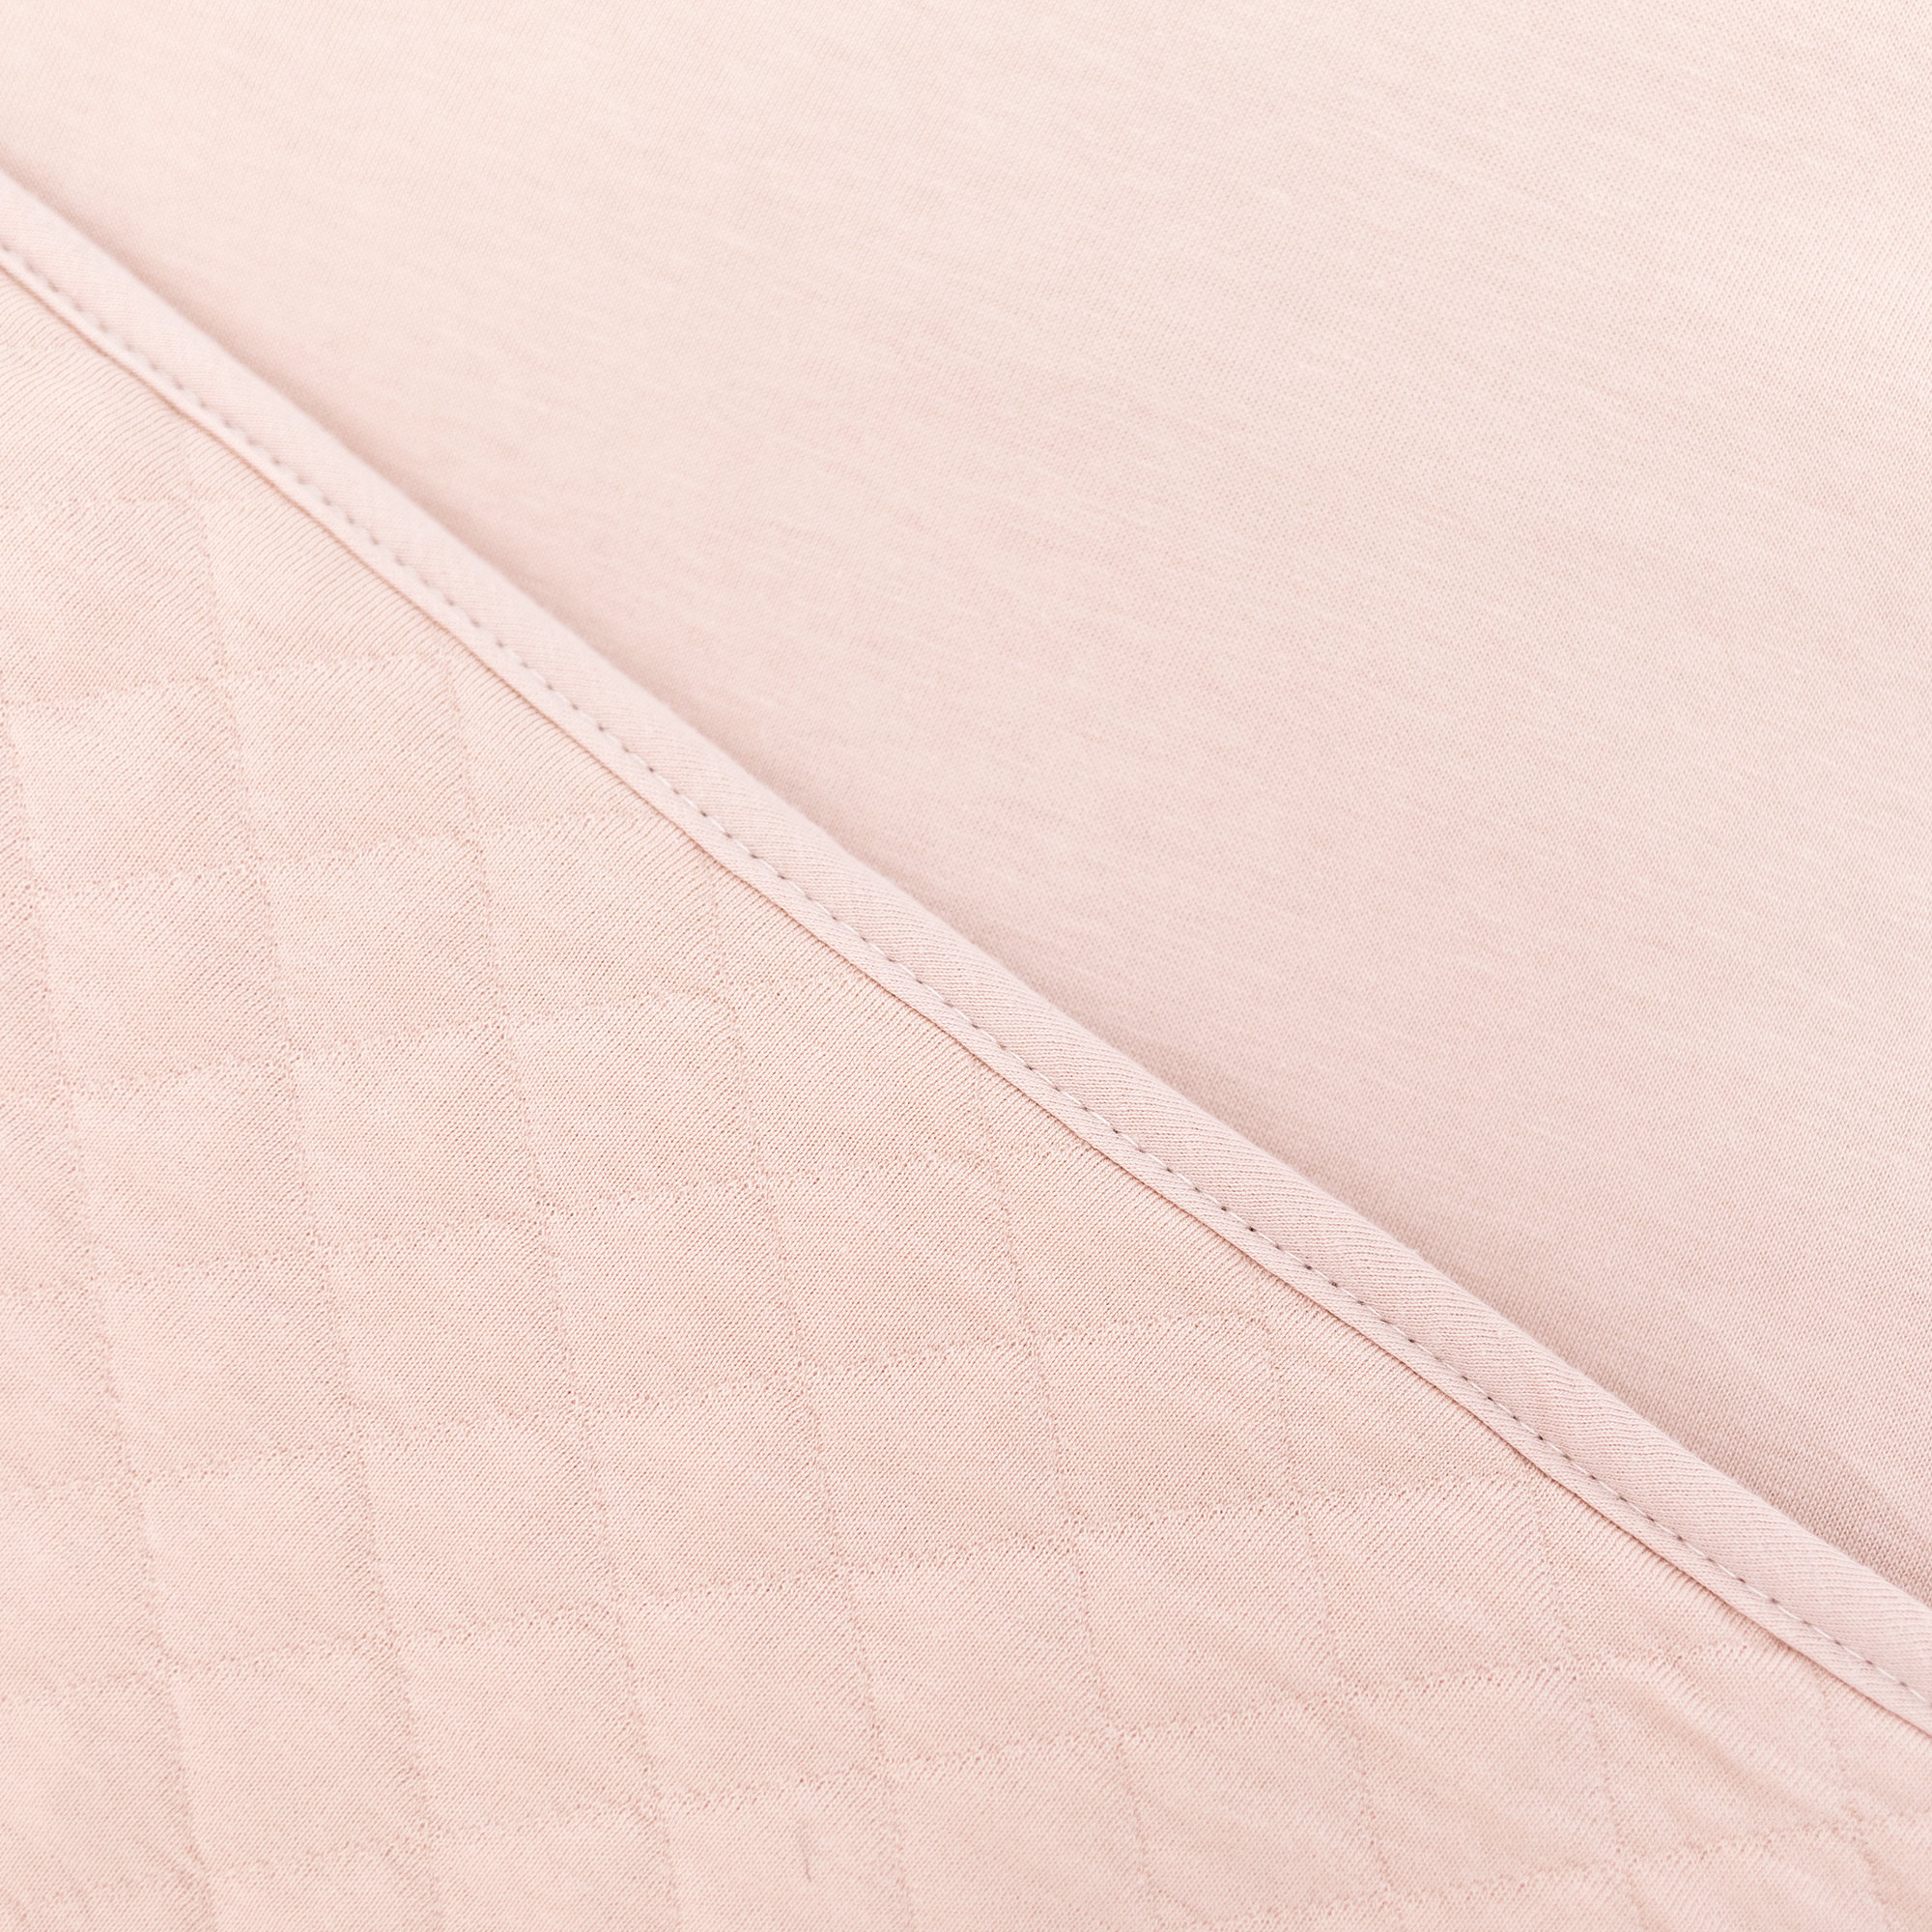 Manta Pady quilted + jersey 75x100cm QUILT Blush tog 3